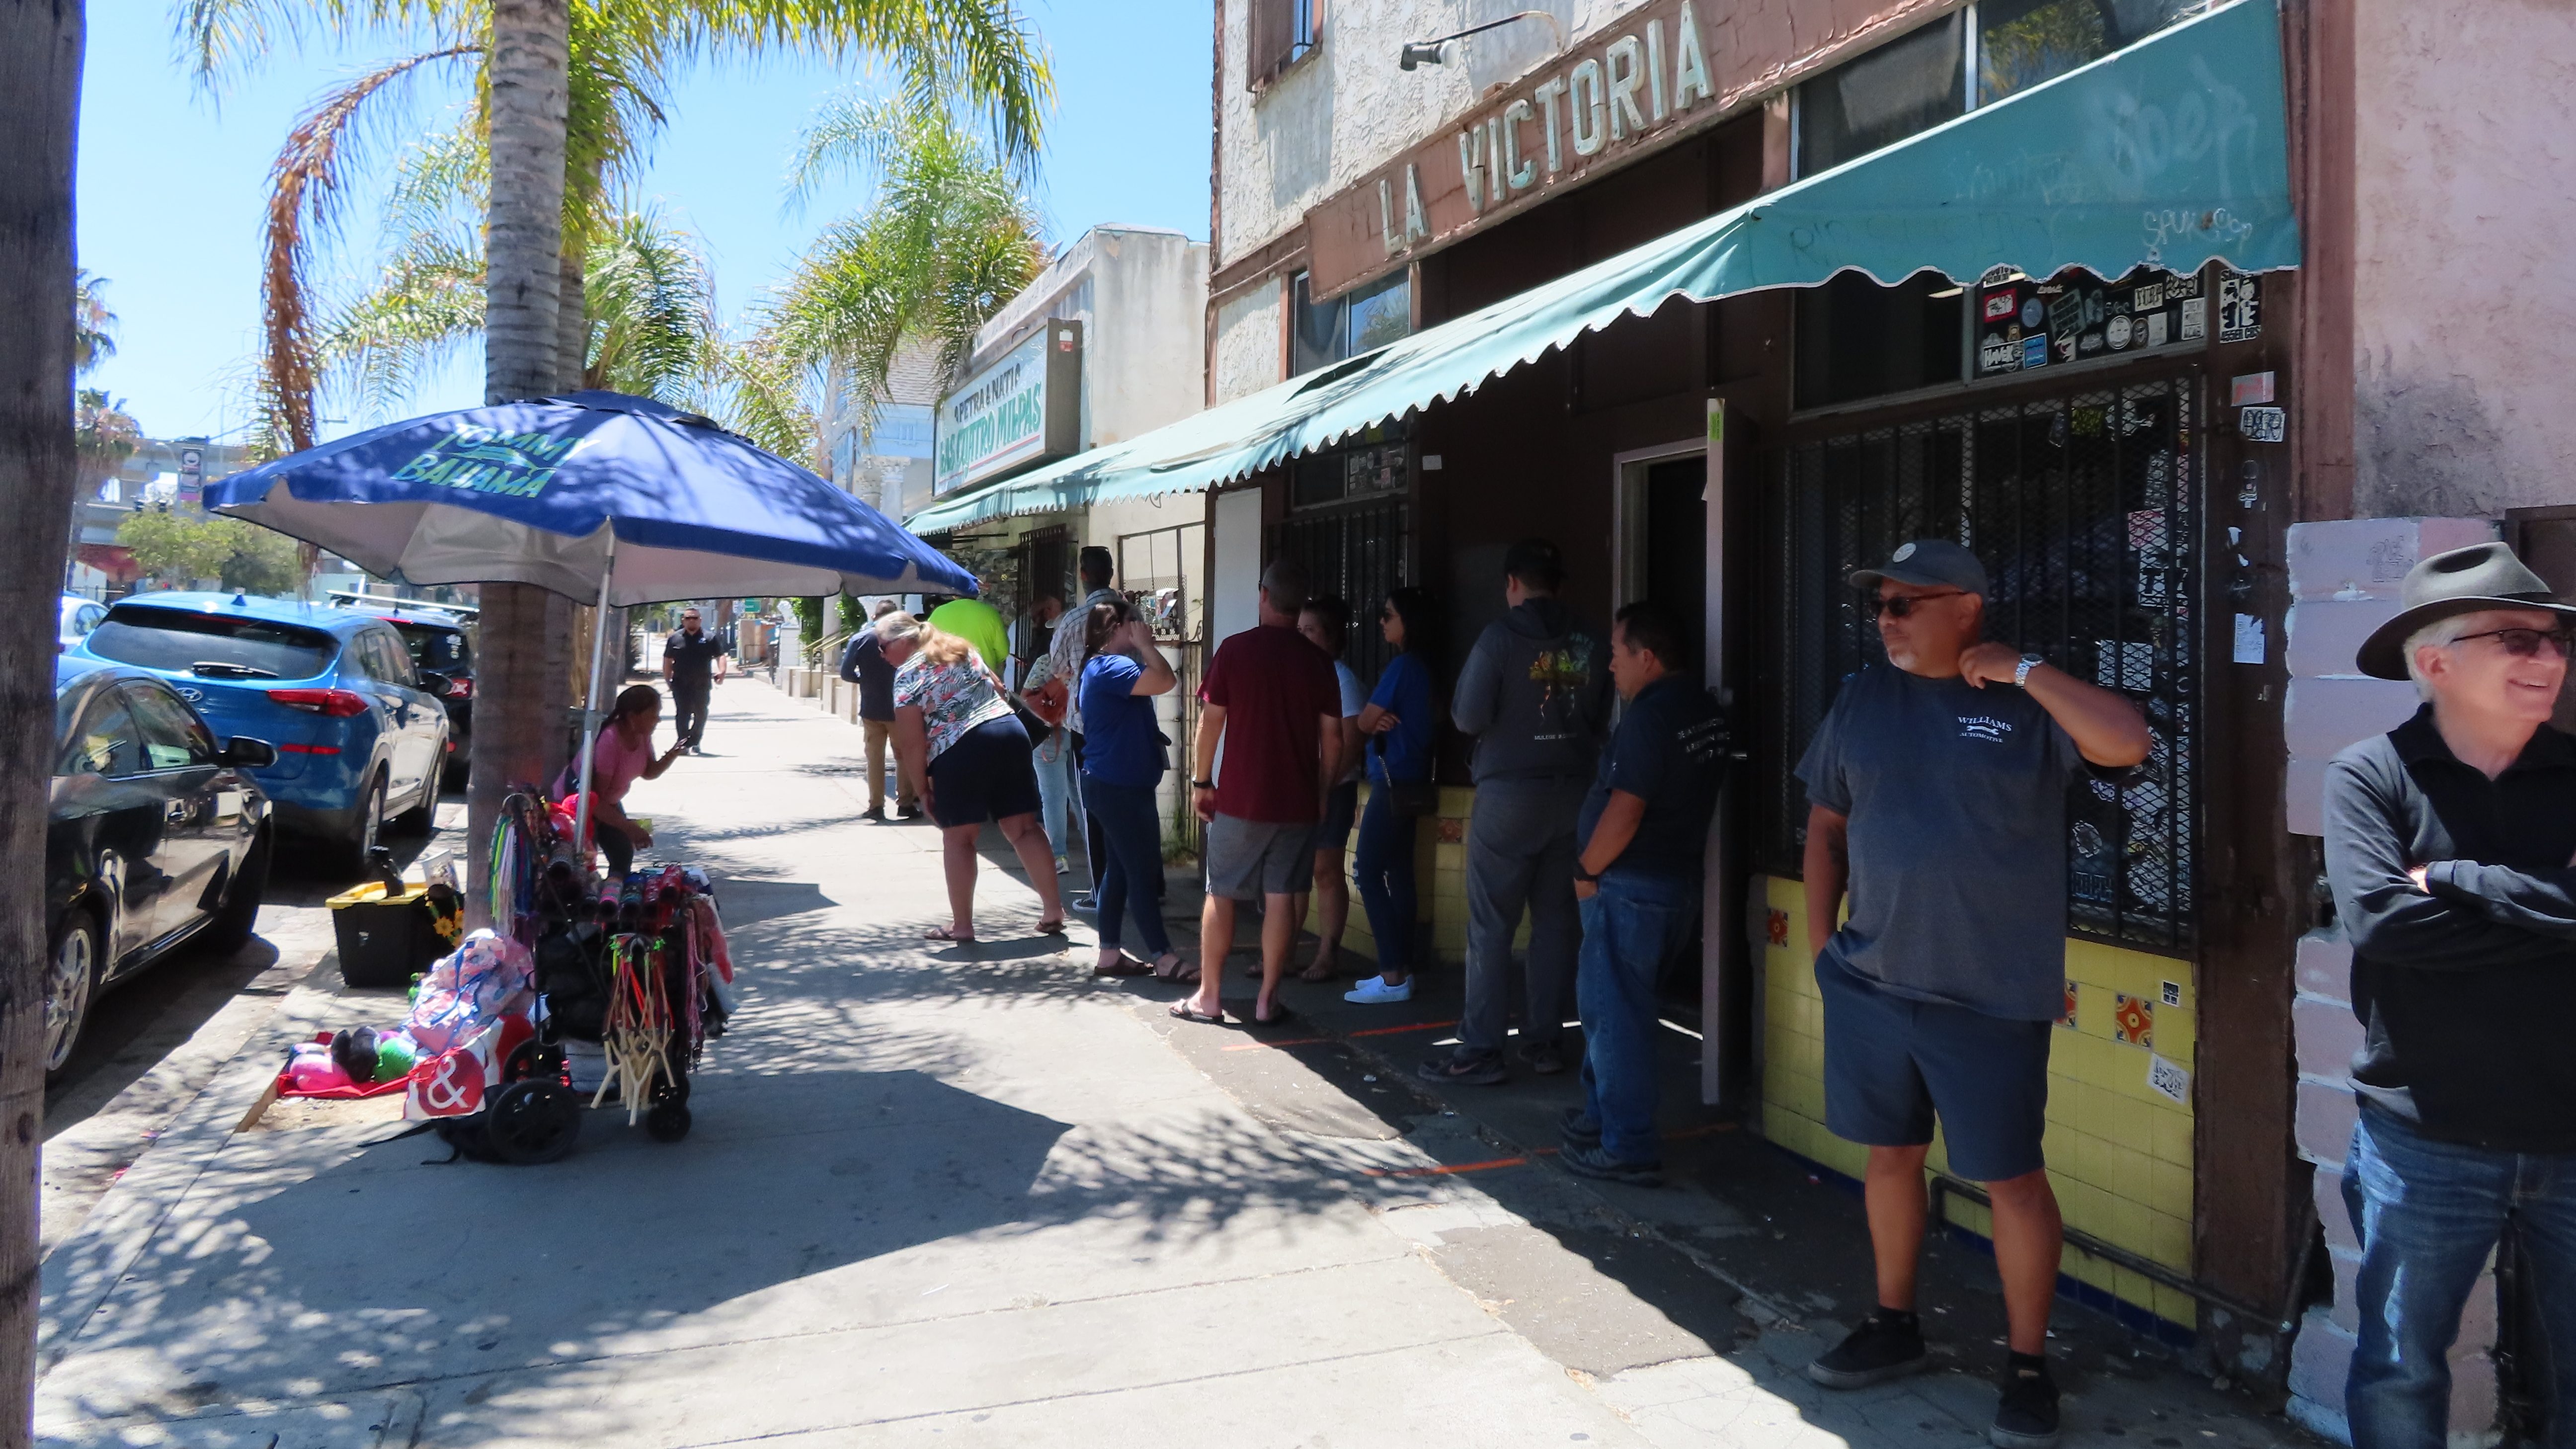 Candid shot of line for food outside Los Cuatro Milpas. There is a guy tugging at his shirt in the heat. A person is looking over at a small stall where a woman sells jewelry and other items to people in line at the restaurant. It stretches for 70-80 feet or so across the length of the restaurant. There are palm trees along the sidewalk.